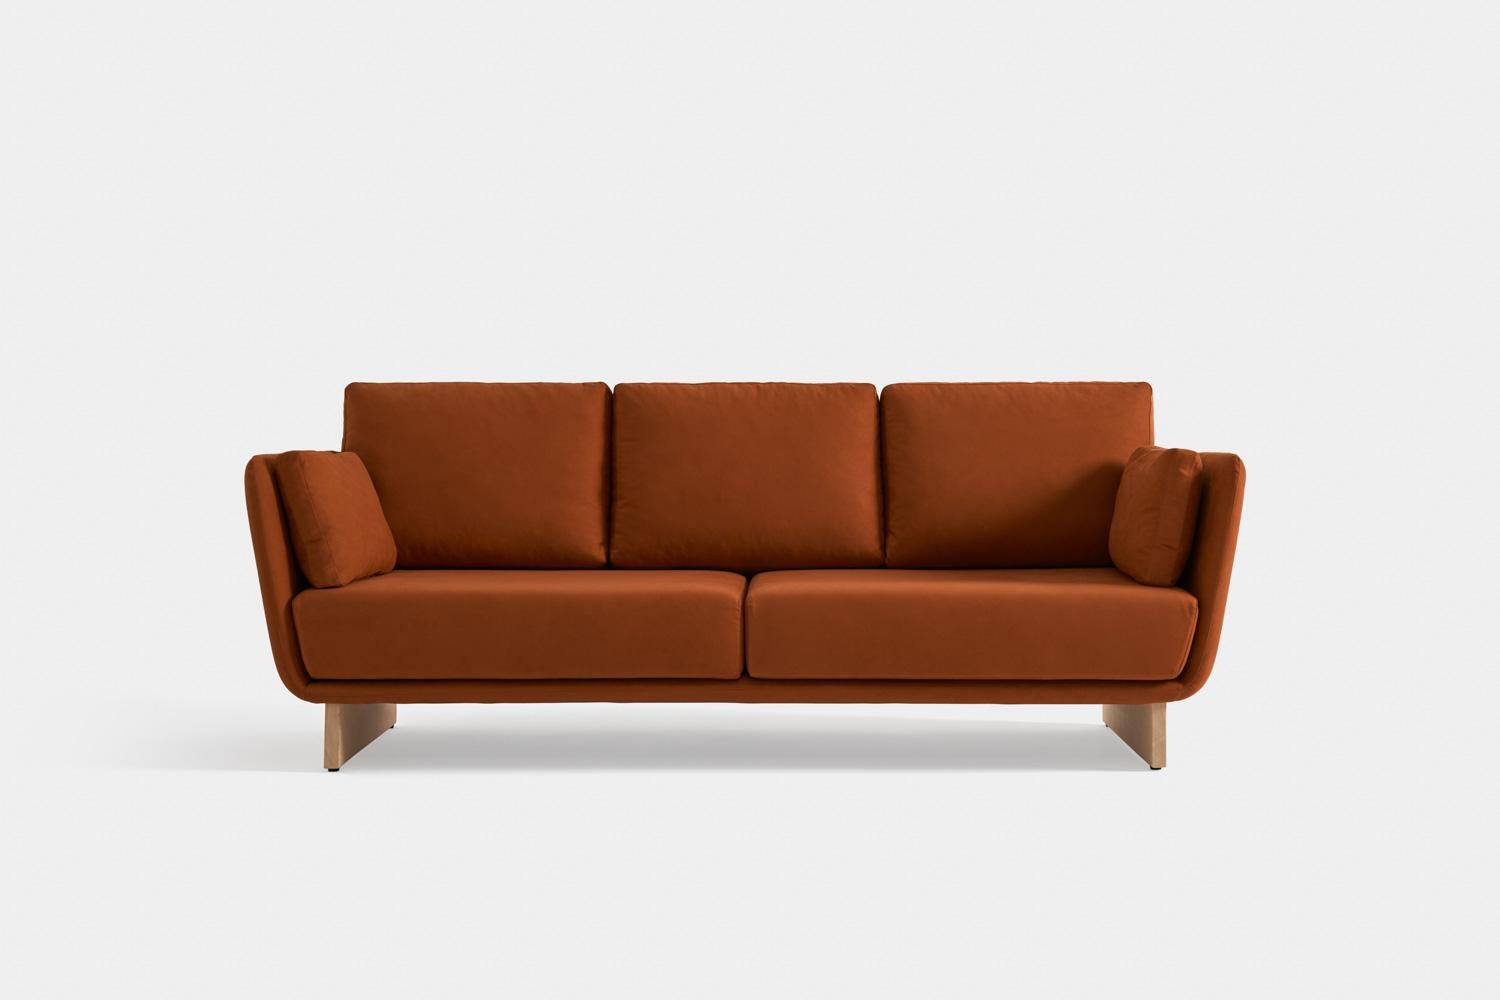 3P Swan sofa by Pepe Albargues
Dimensions: D 93 x W 186 x H 92 cm
Materials: Iron, MDF, foam, polyester, goose

Iron and fibre MDF structure.
Foam CMHR (high resilience and flame retardant) is used for the seats.
Backrest cushions stuffed with